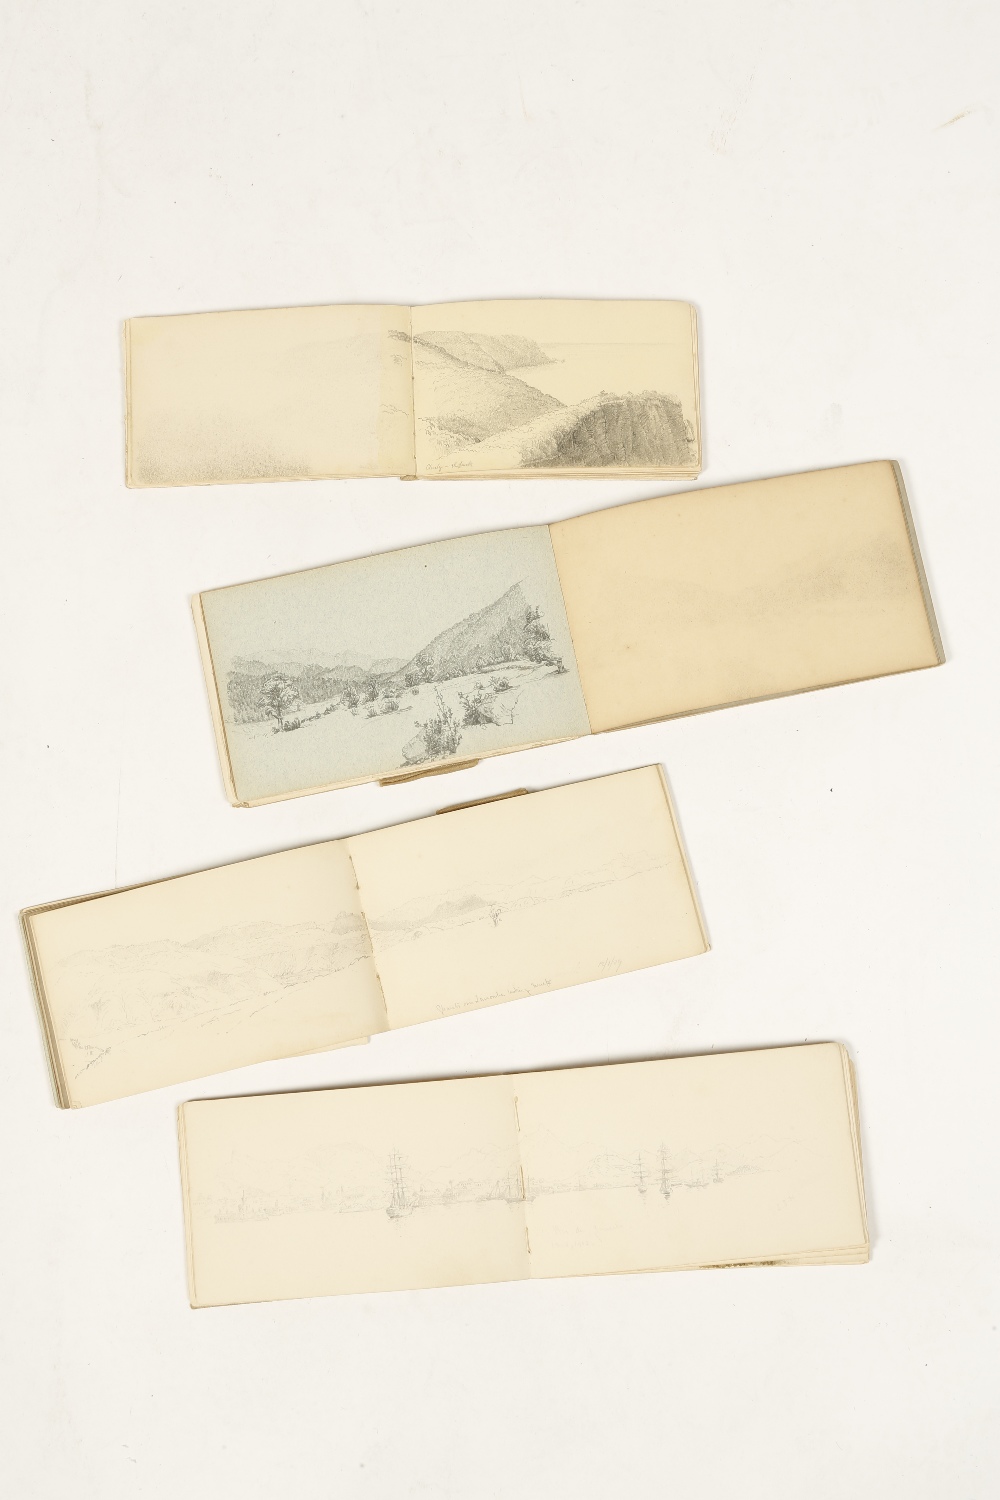 CHARLES L ROBERTSON (1844-1891) Four sketch books containing a variety of sketches, a number